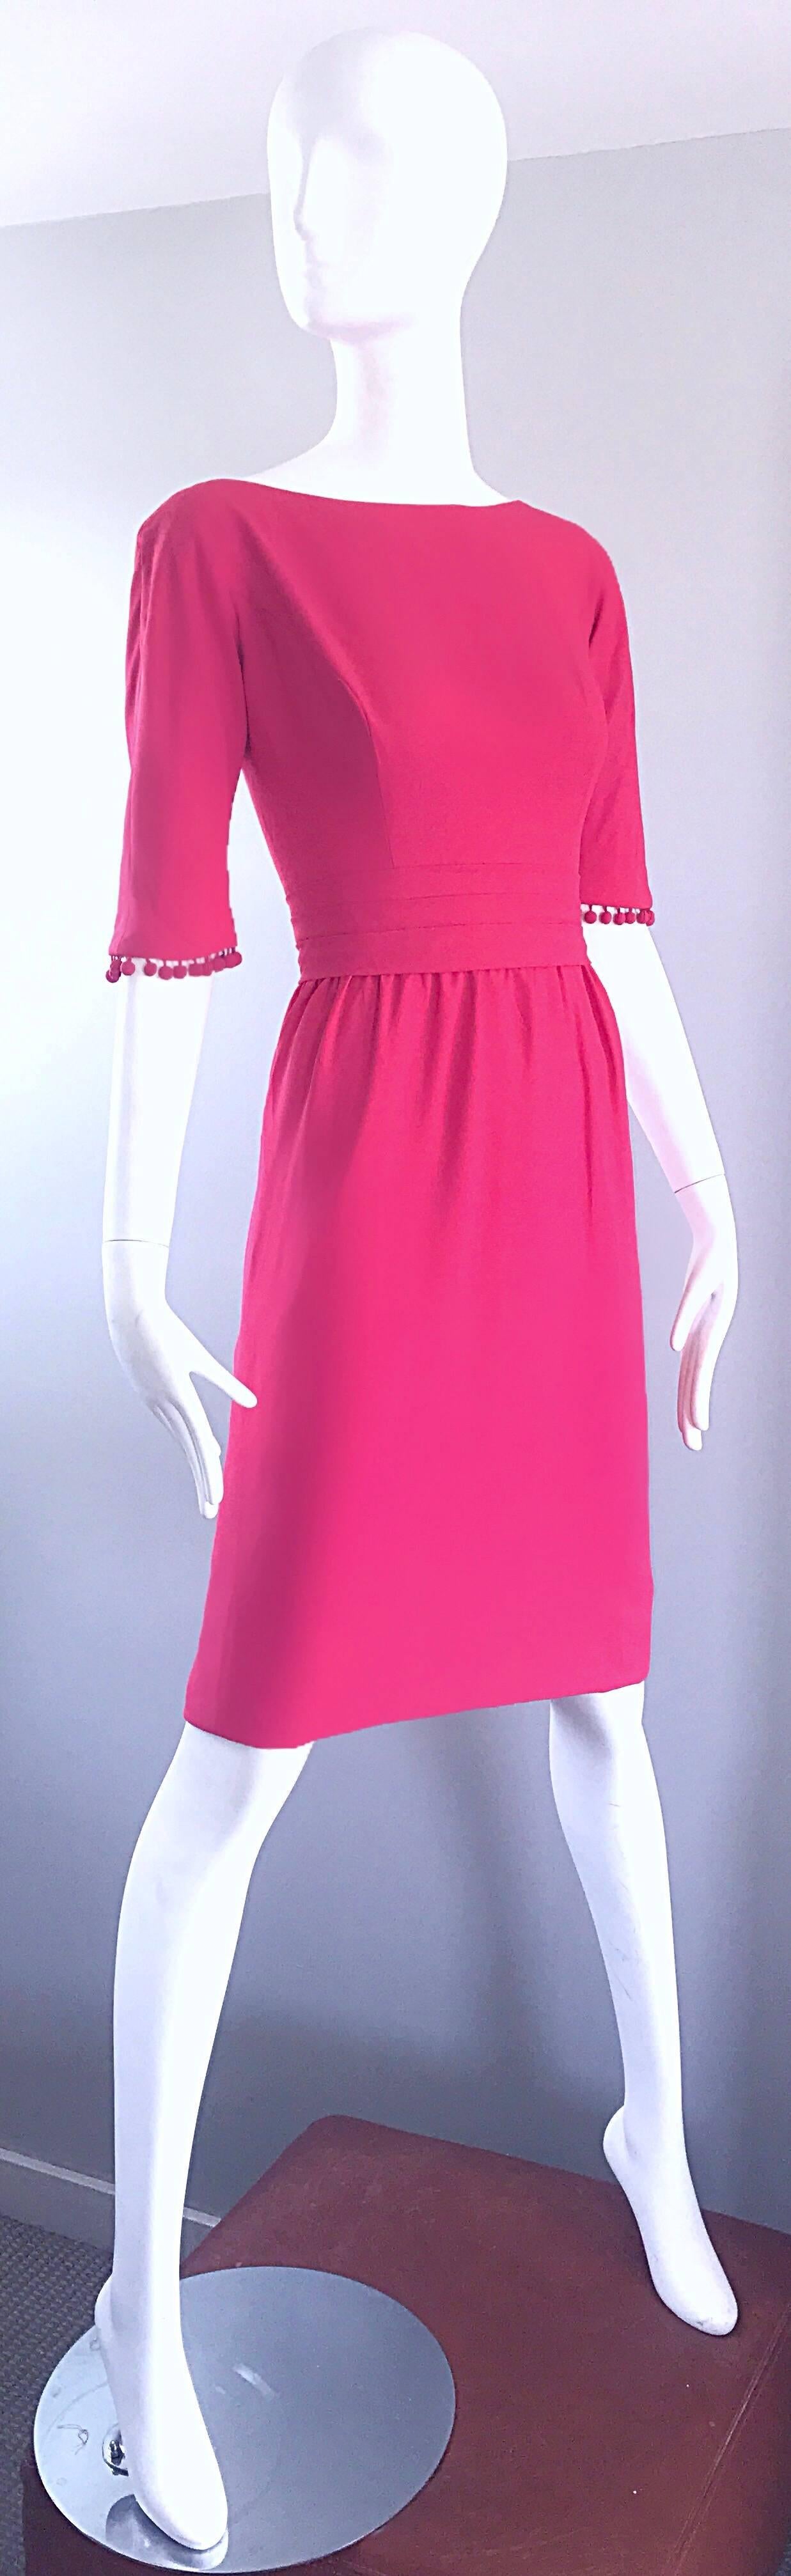 Beautiful 1950s Demi Couture Raspberry Pink 3/4 Sleeves Vintage 50s Crepe Dress  For Sale 3